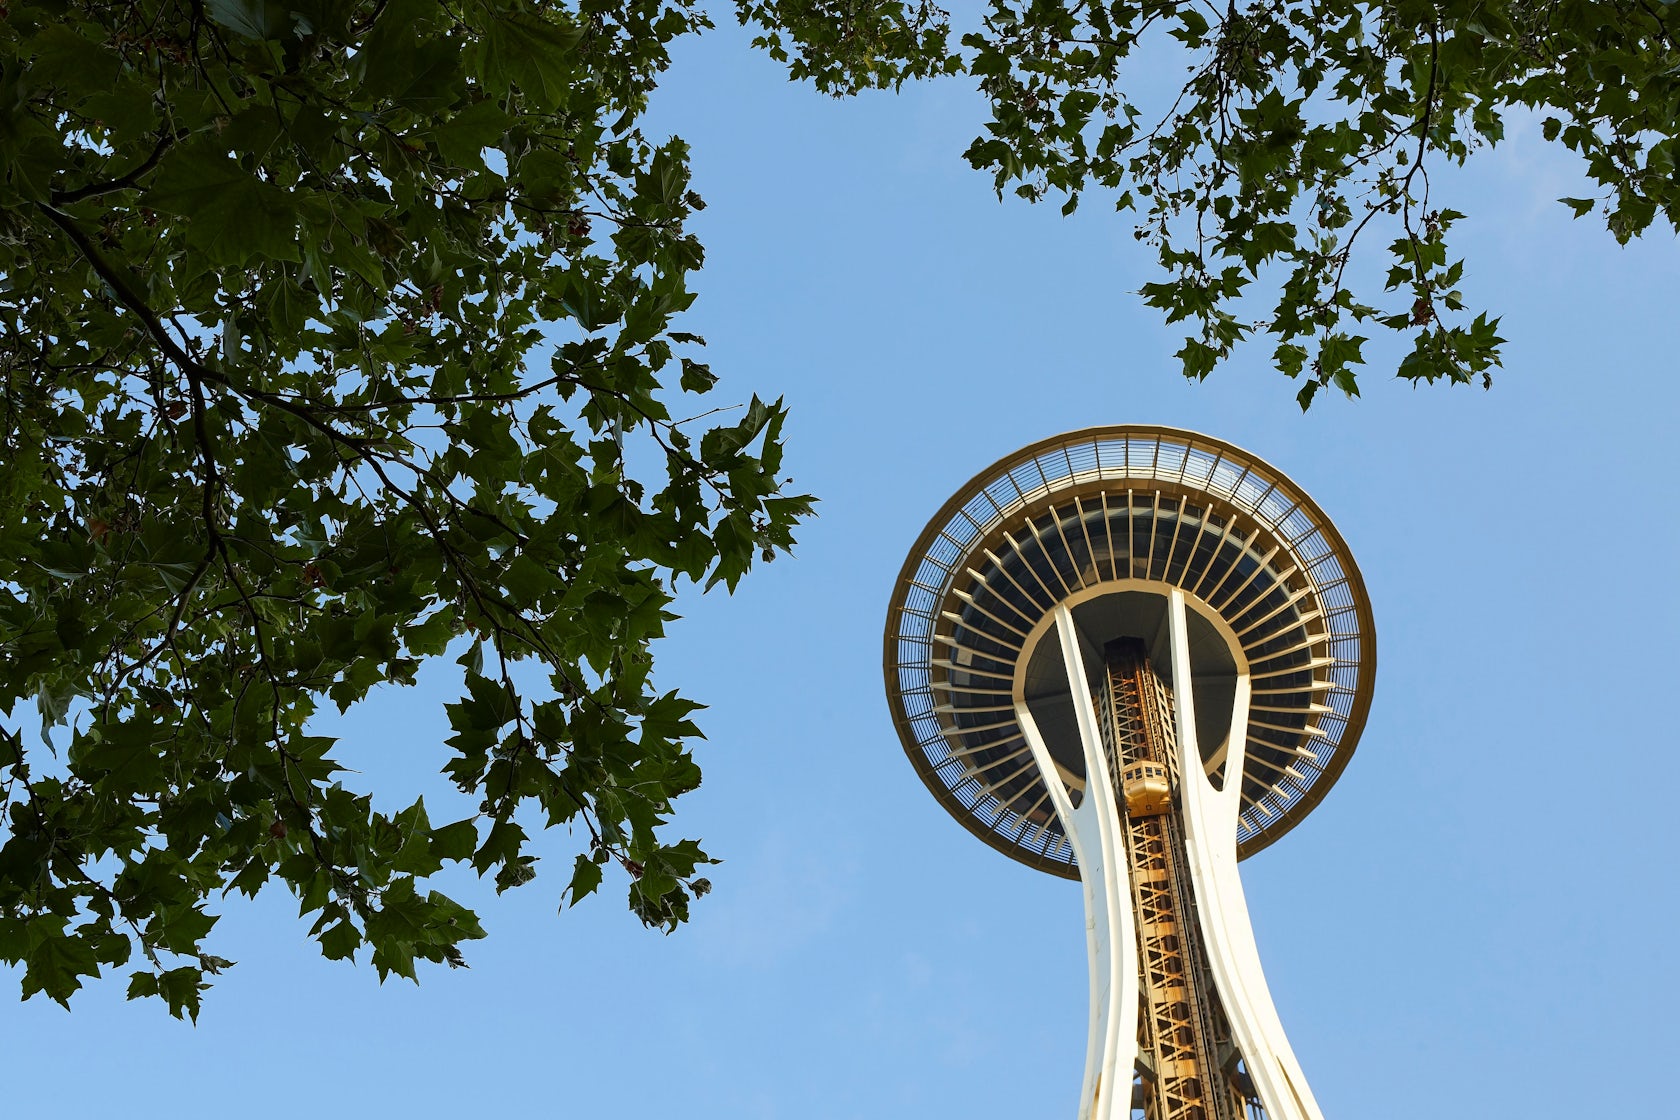 Measuring the Space Needle, or Why Triangles Are Awesome